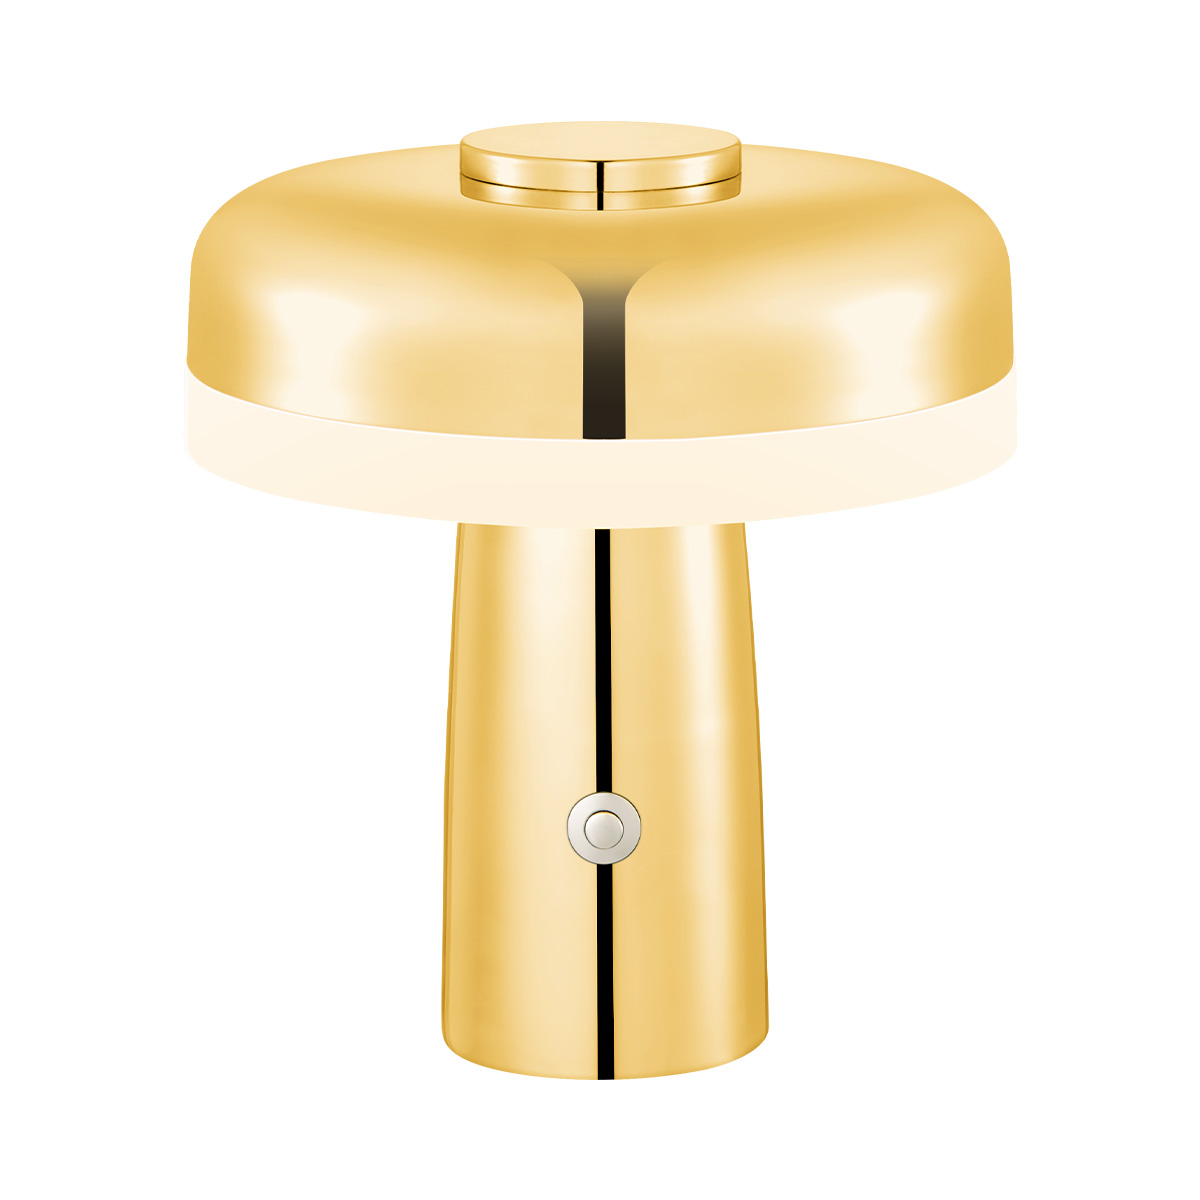 Tangla lighting - TLT7499-01GD - LED Table lamp - rechargeable metal and glass - gold - rechargeable